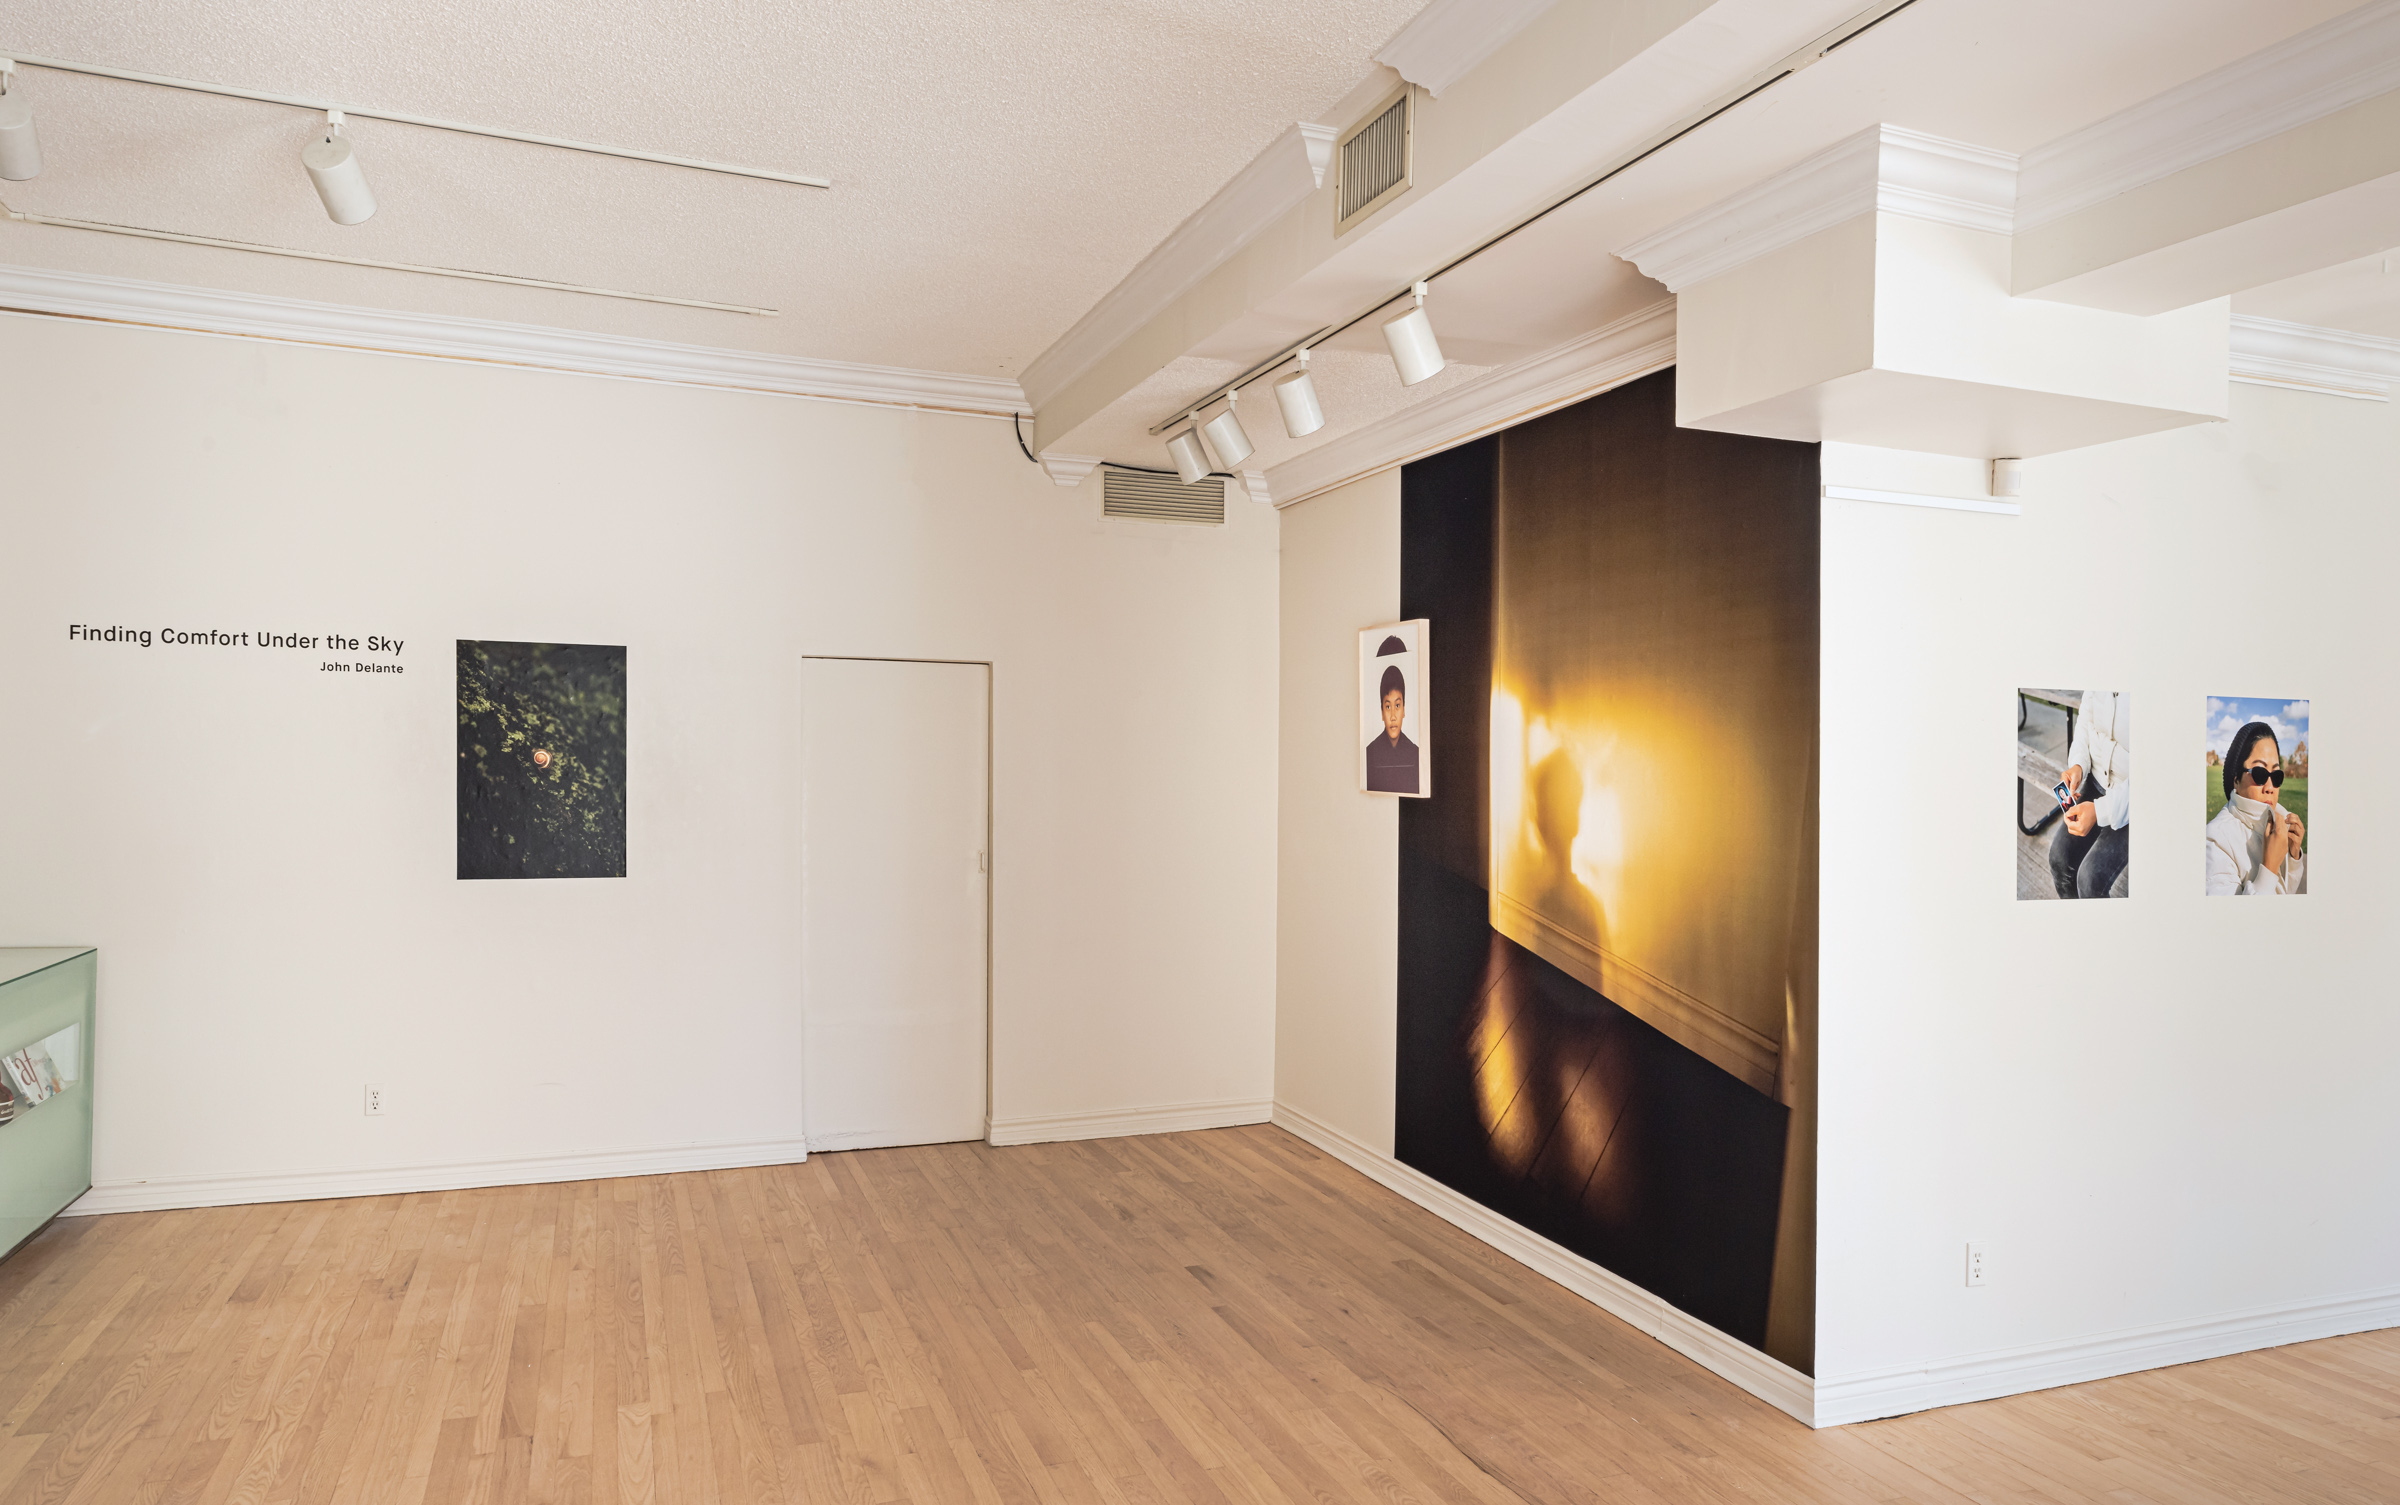     John Delante, Finding Comfort Under the Sky, installation view, Alliance Française Gallery, 2022. Courtesy of the artist and CONTACT. Photo: Toni Hafkenscheid

